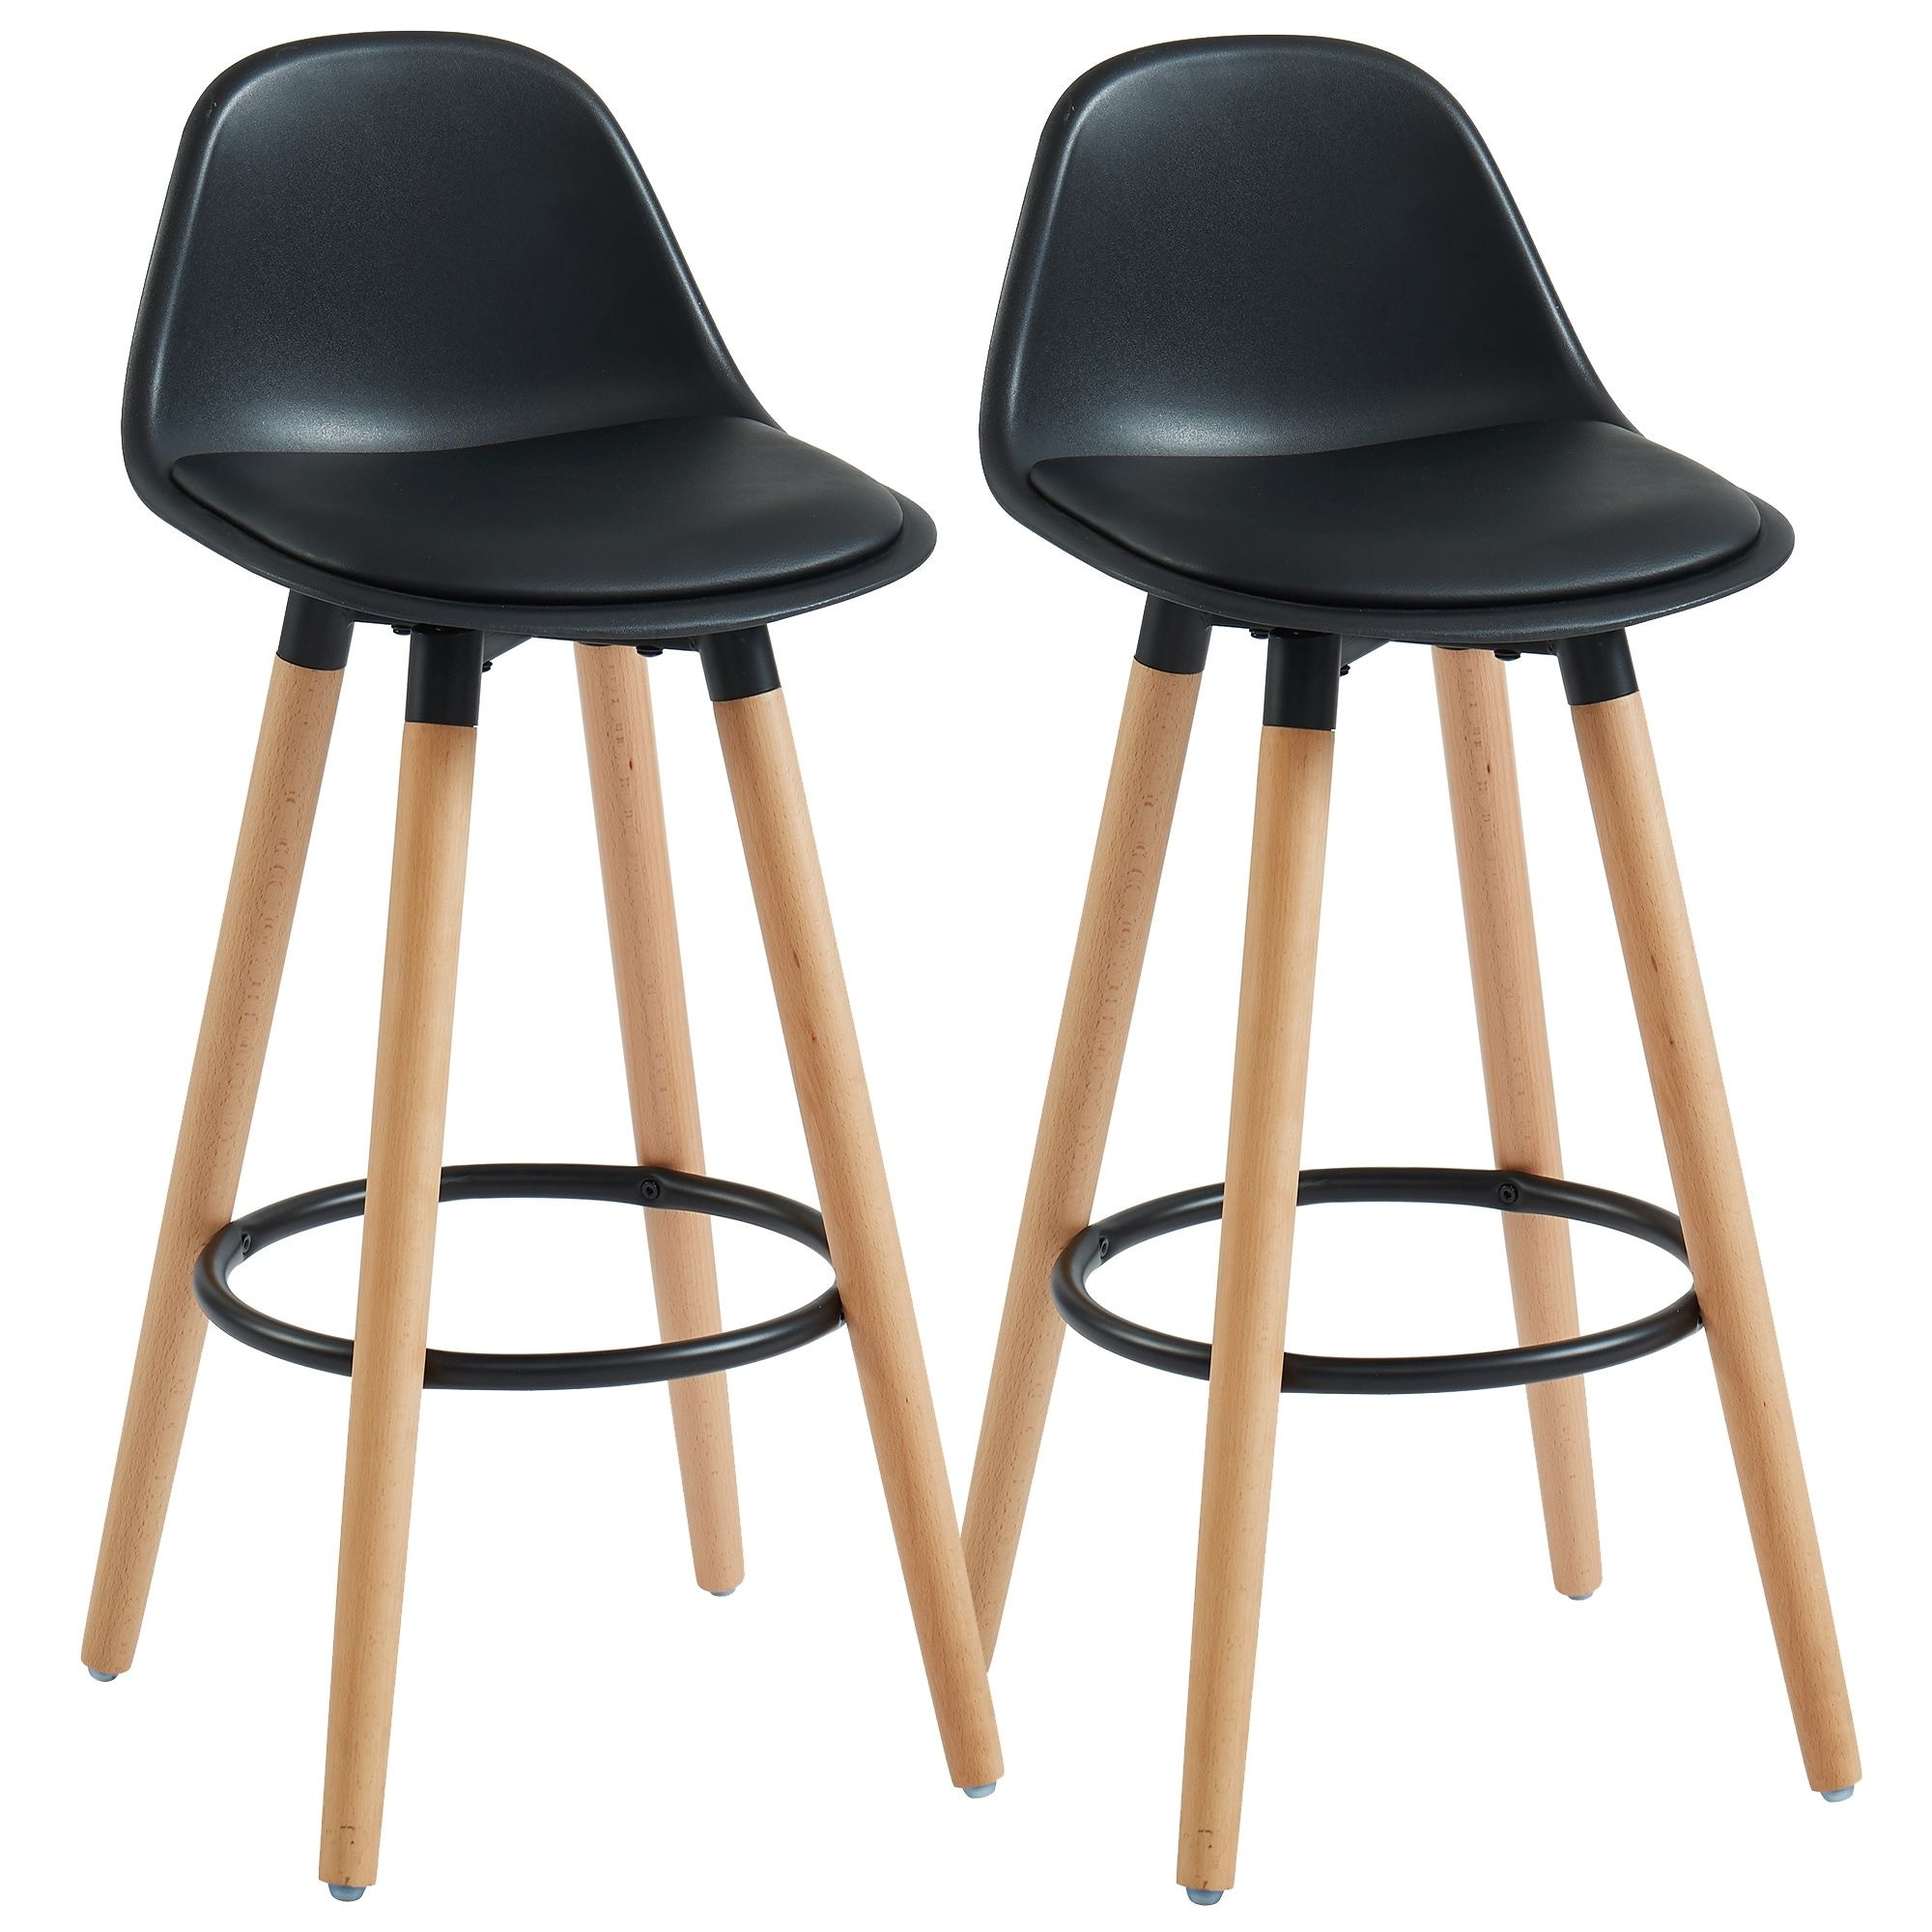 Contemporary Home Living Set of 2 Black and Brown Contemporary Counter Stools 34.75 inch